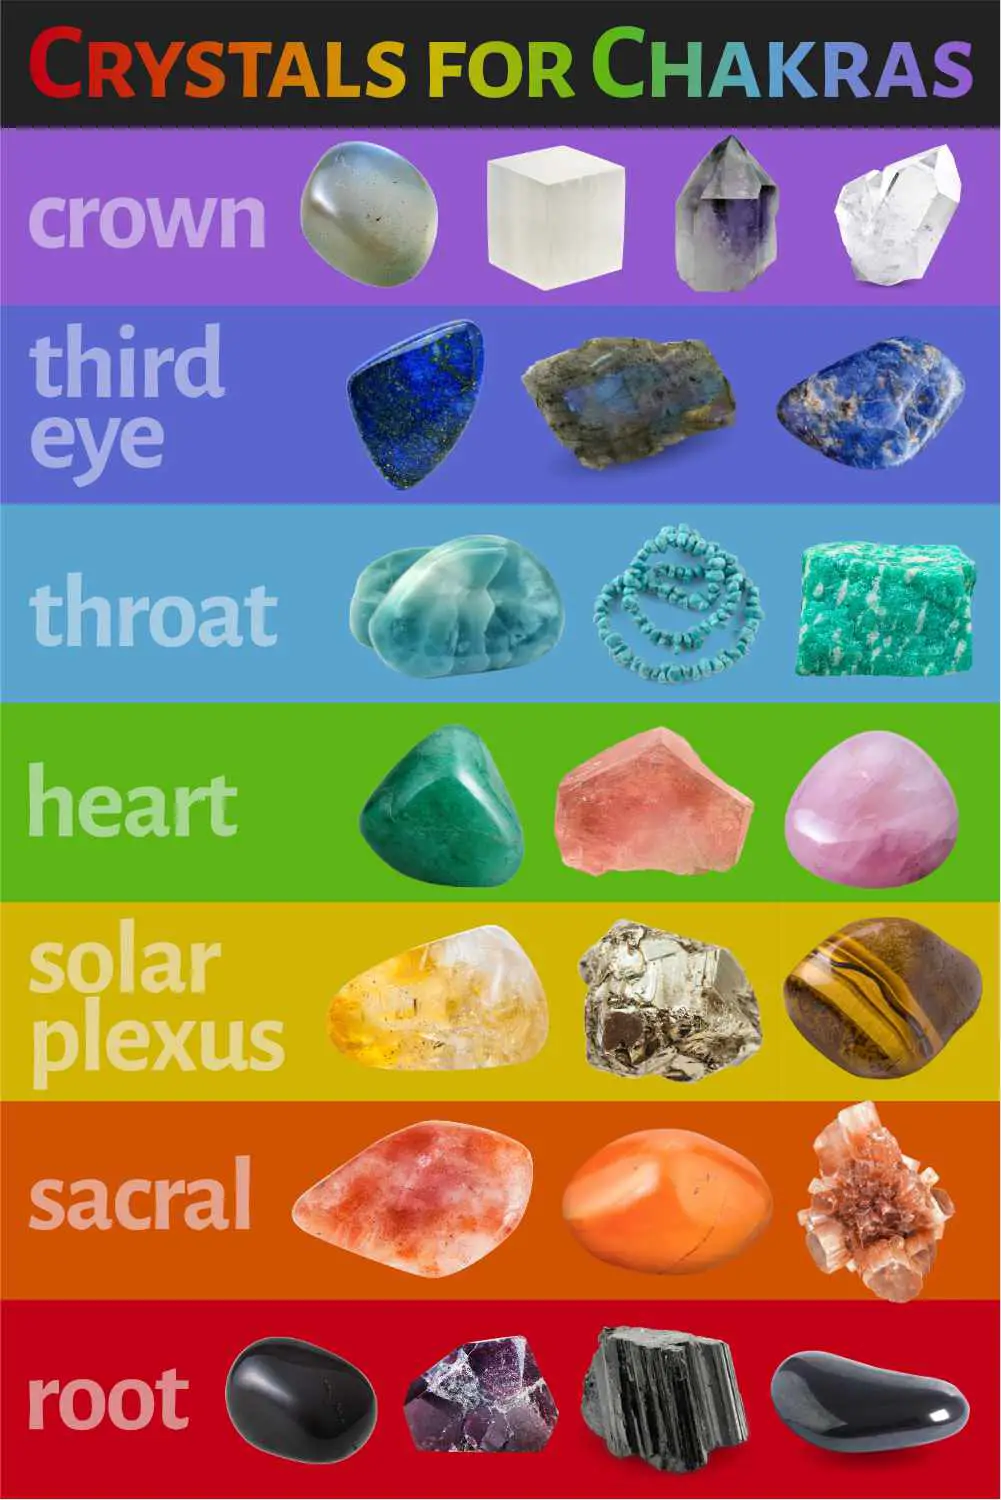 Crystals for Chakras